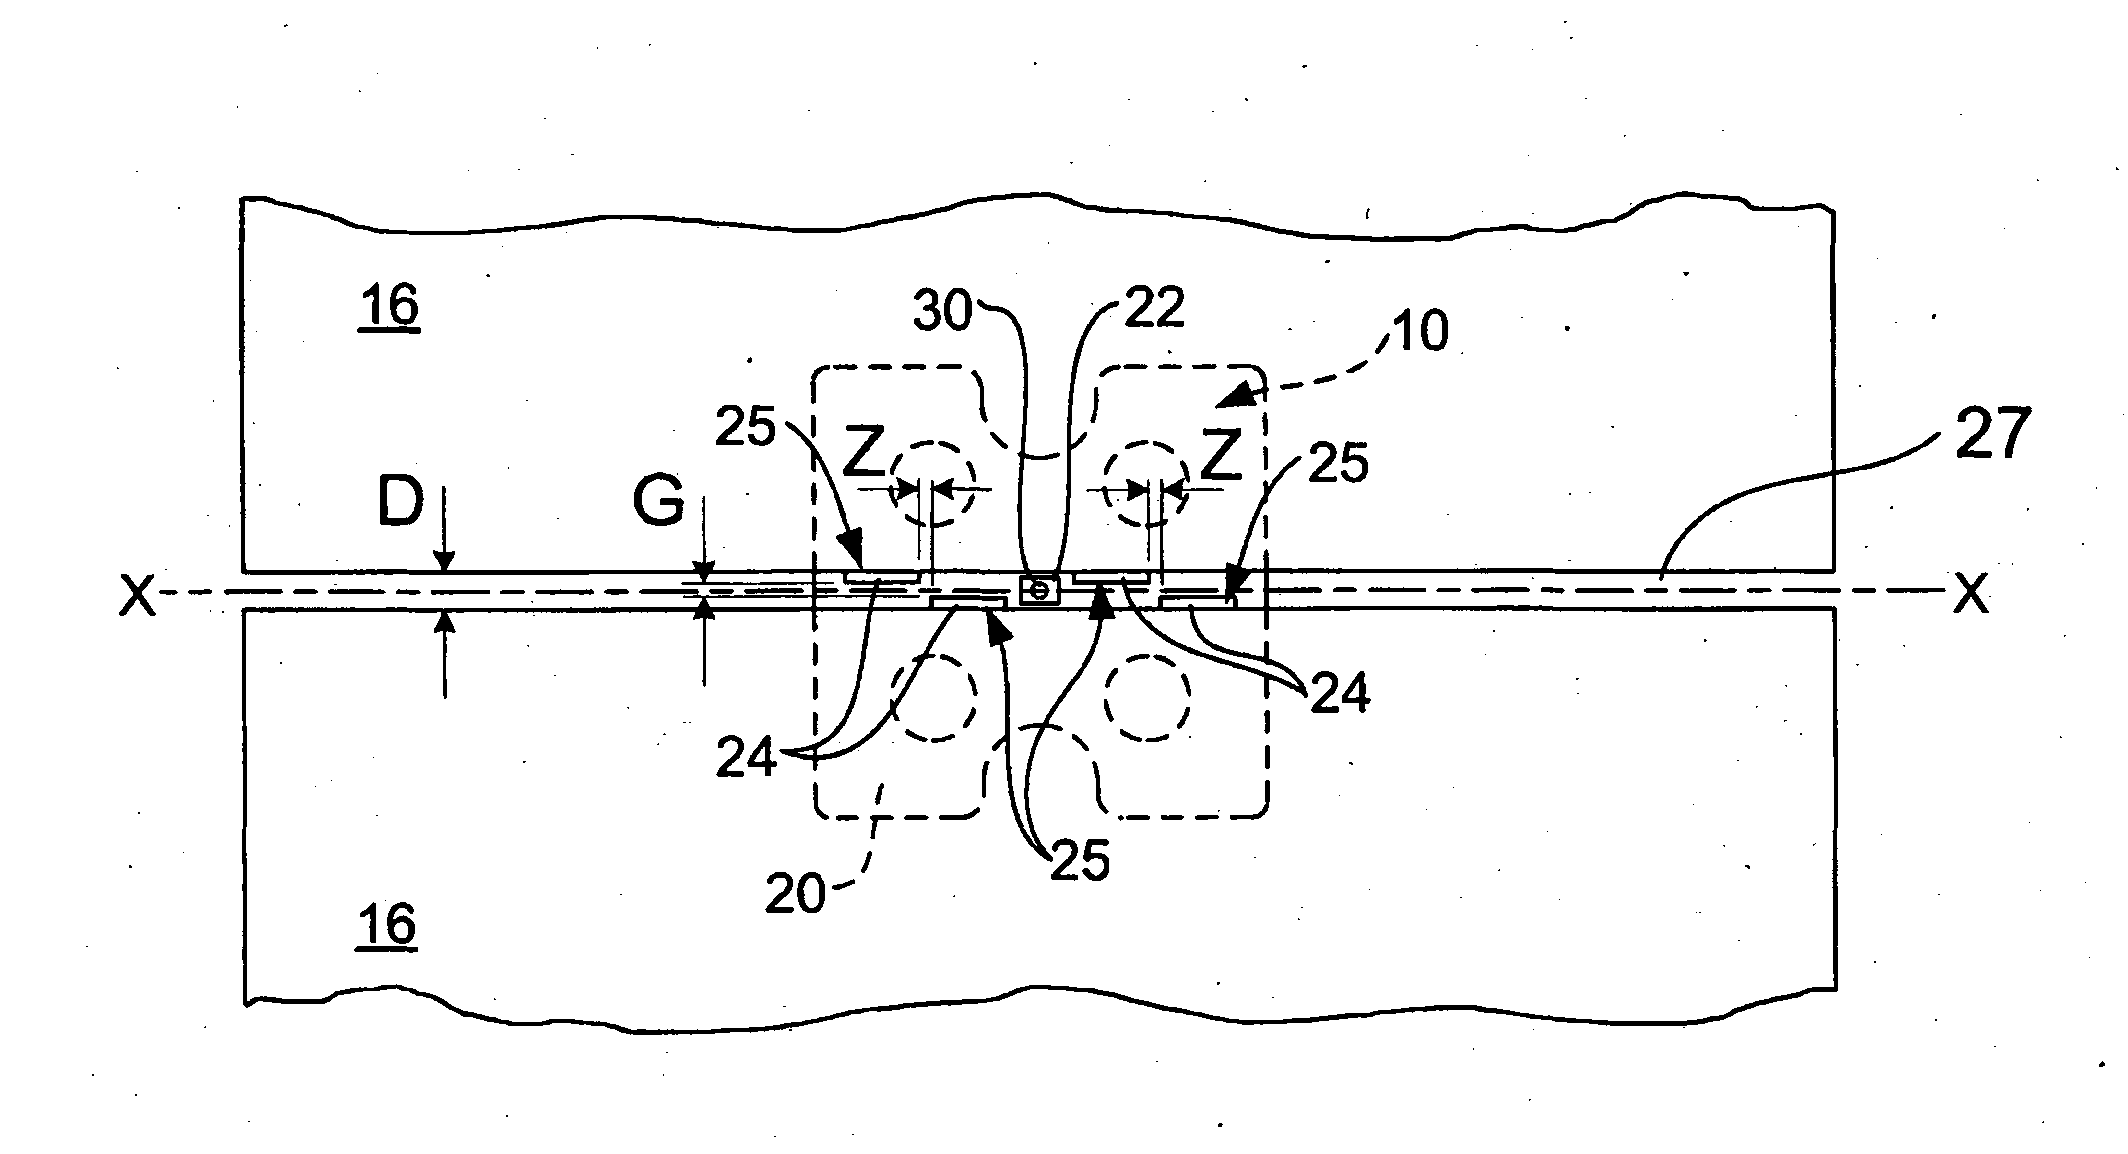 Tile levelling device